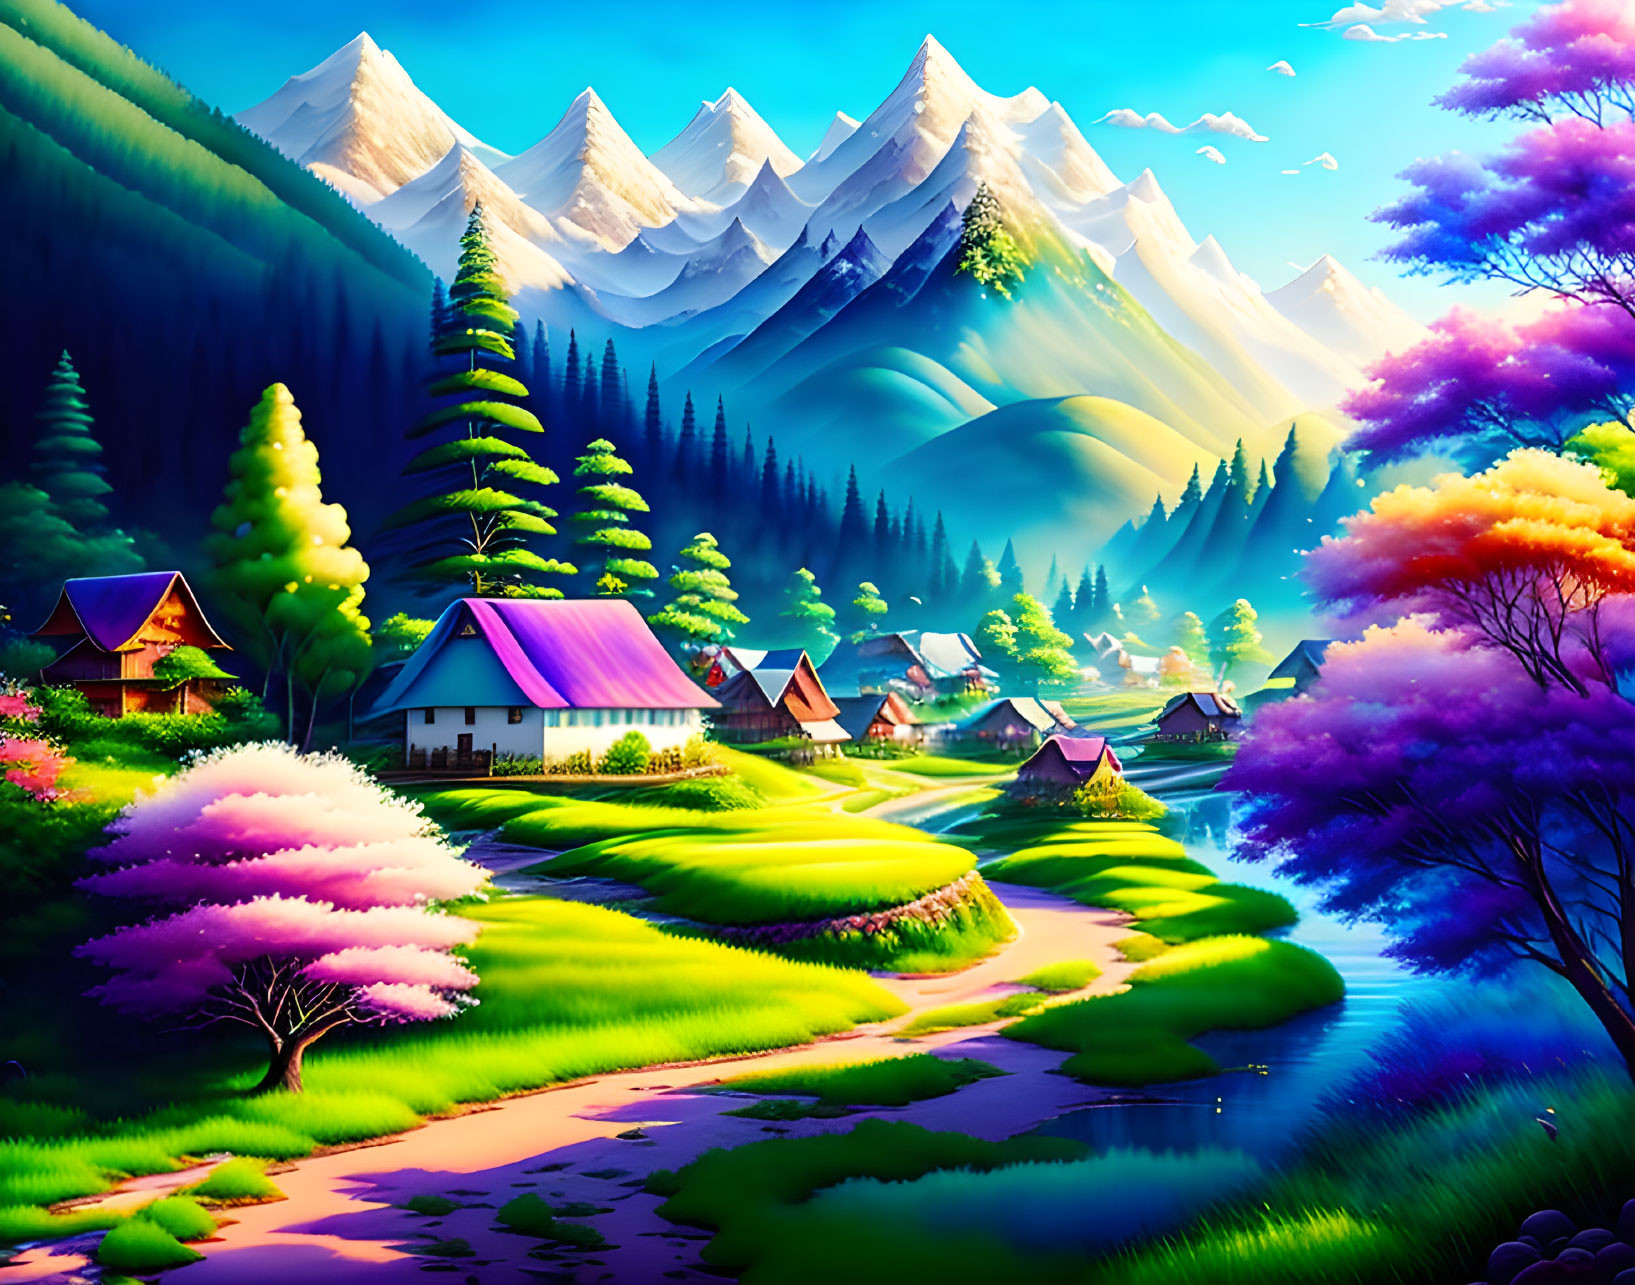 Colorful landscape of tranquil village with cozy houses, lush trees, river, mountains